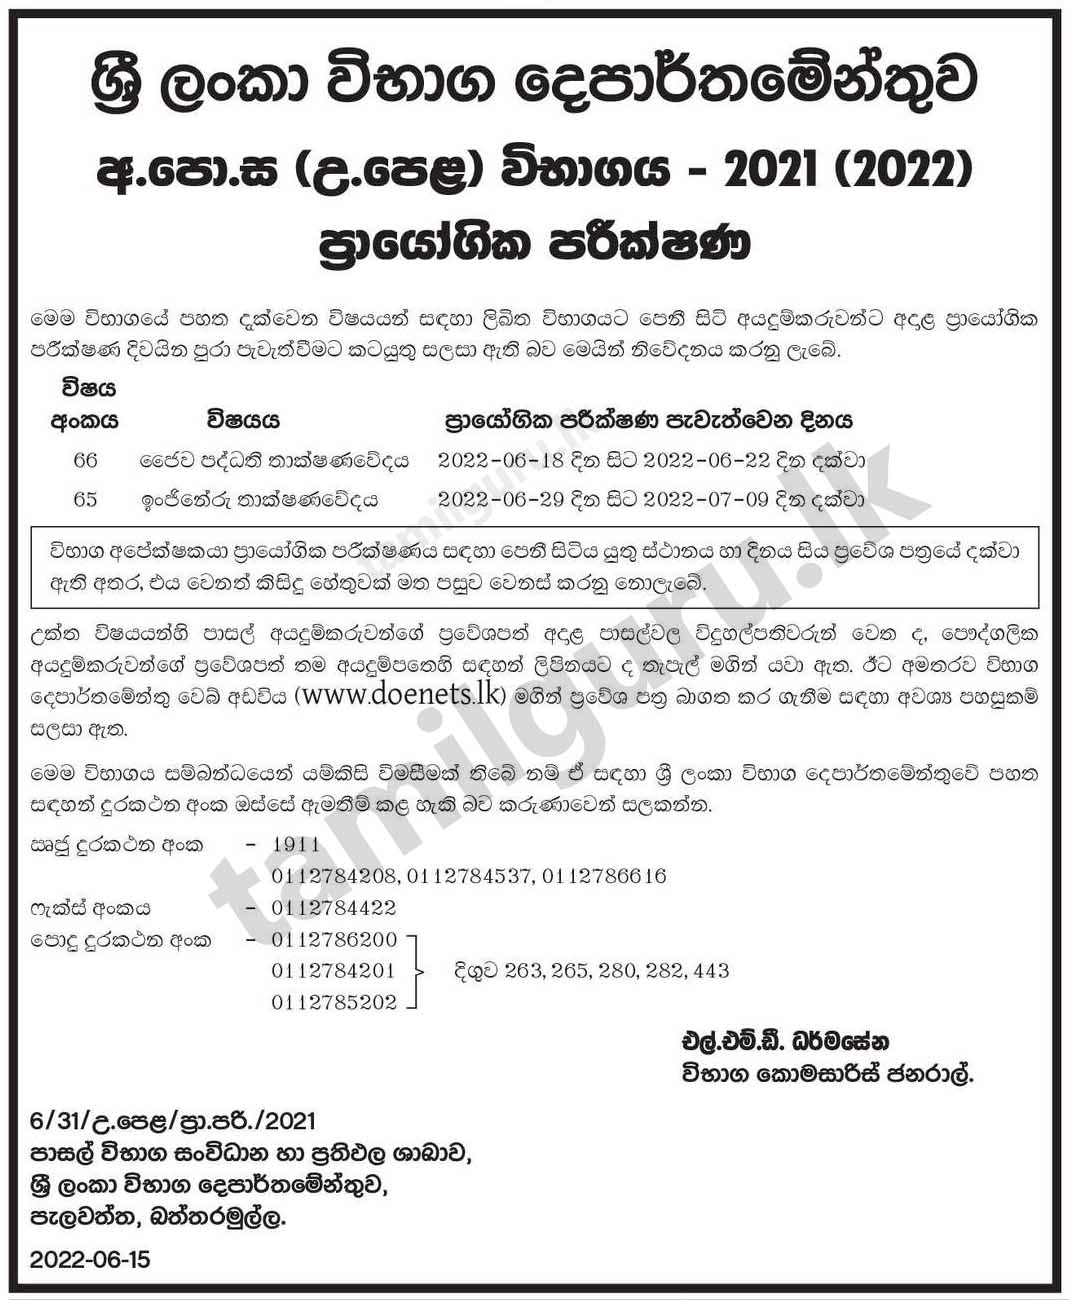 Practical Tests (Technology Stream) - G.C.E. A/L Examination 2021 (2022) (Details in Sinhala)